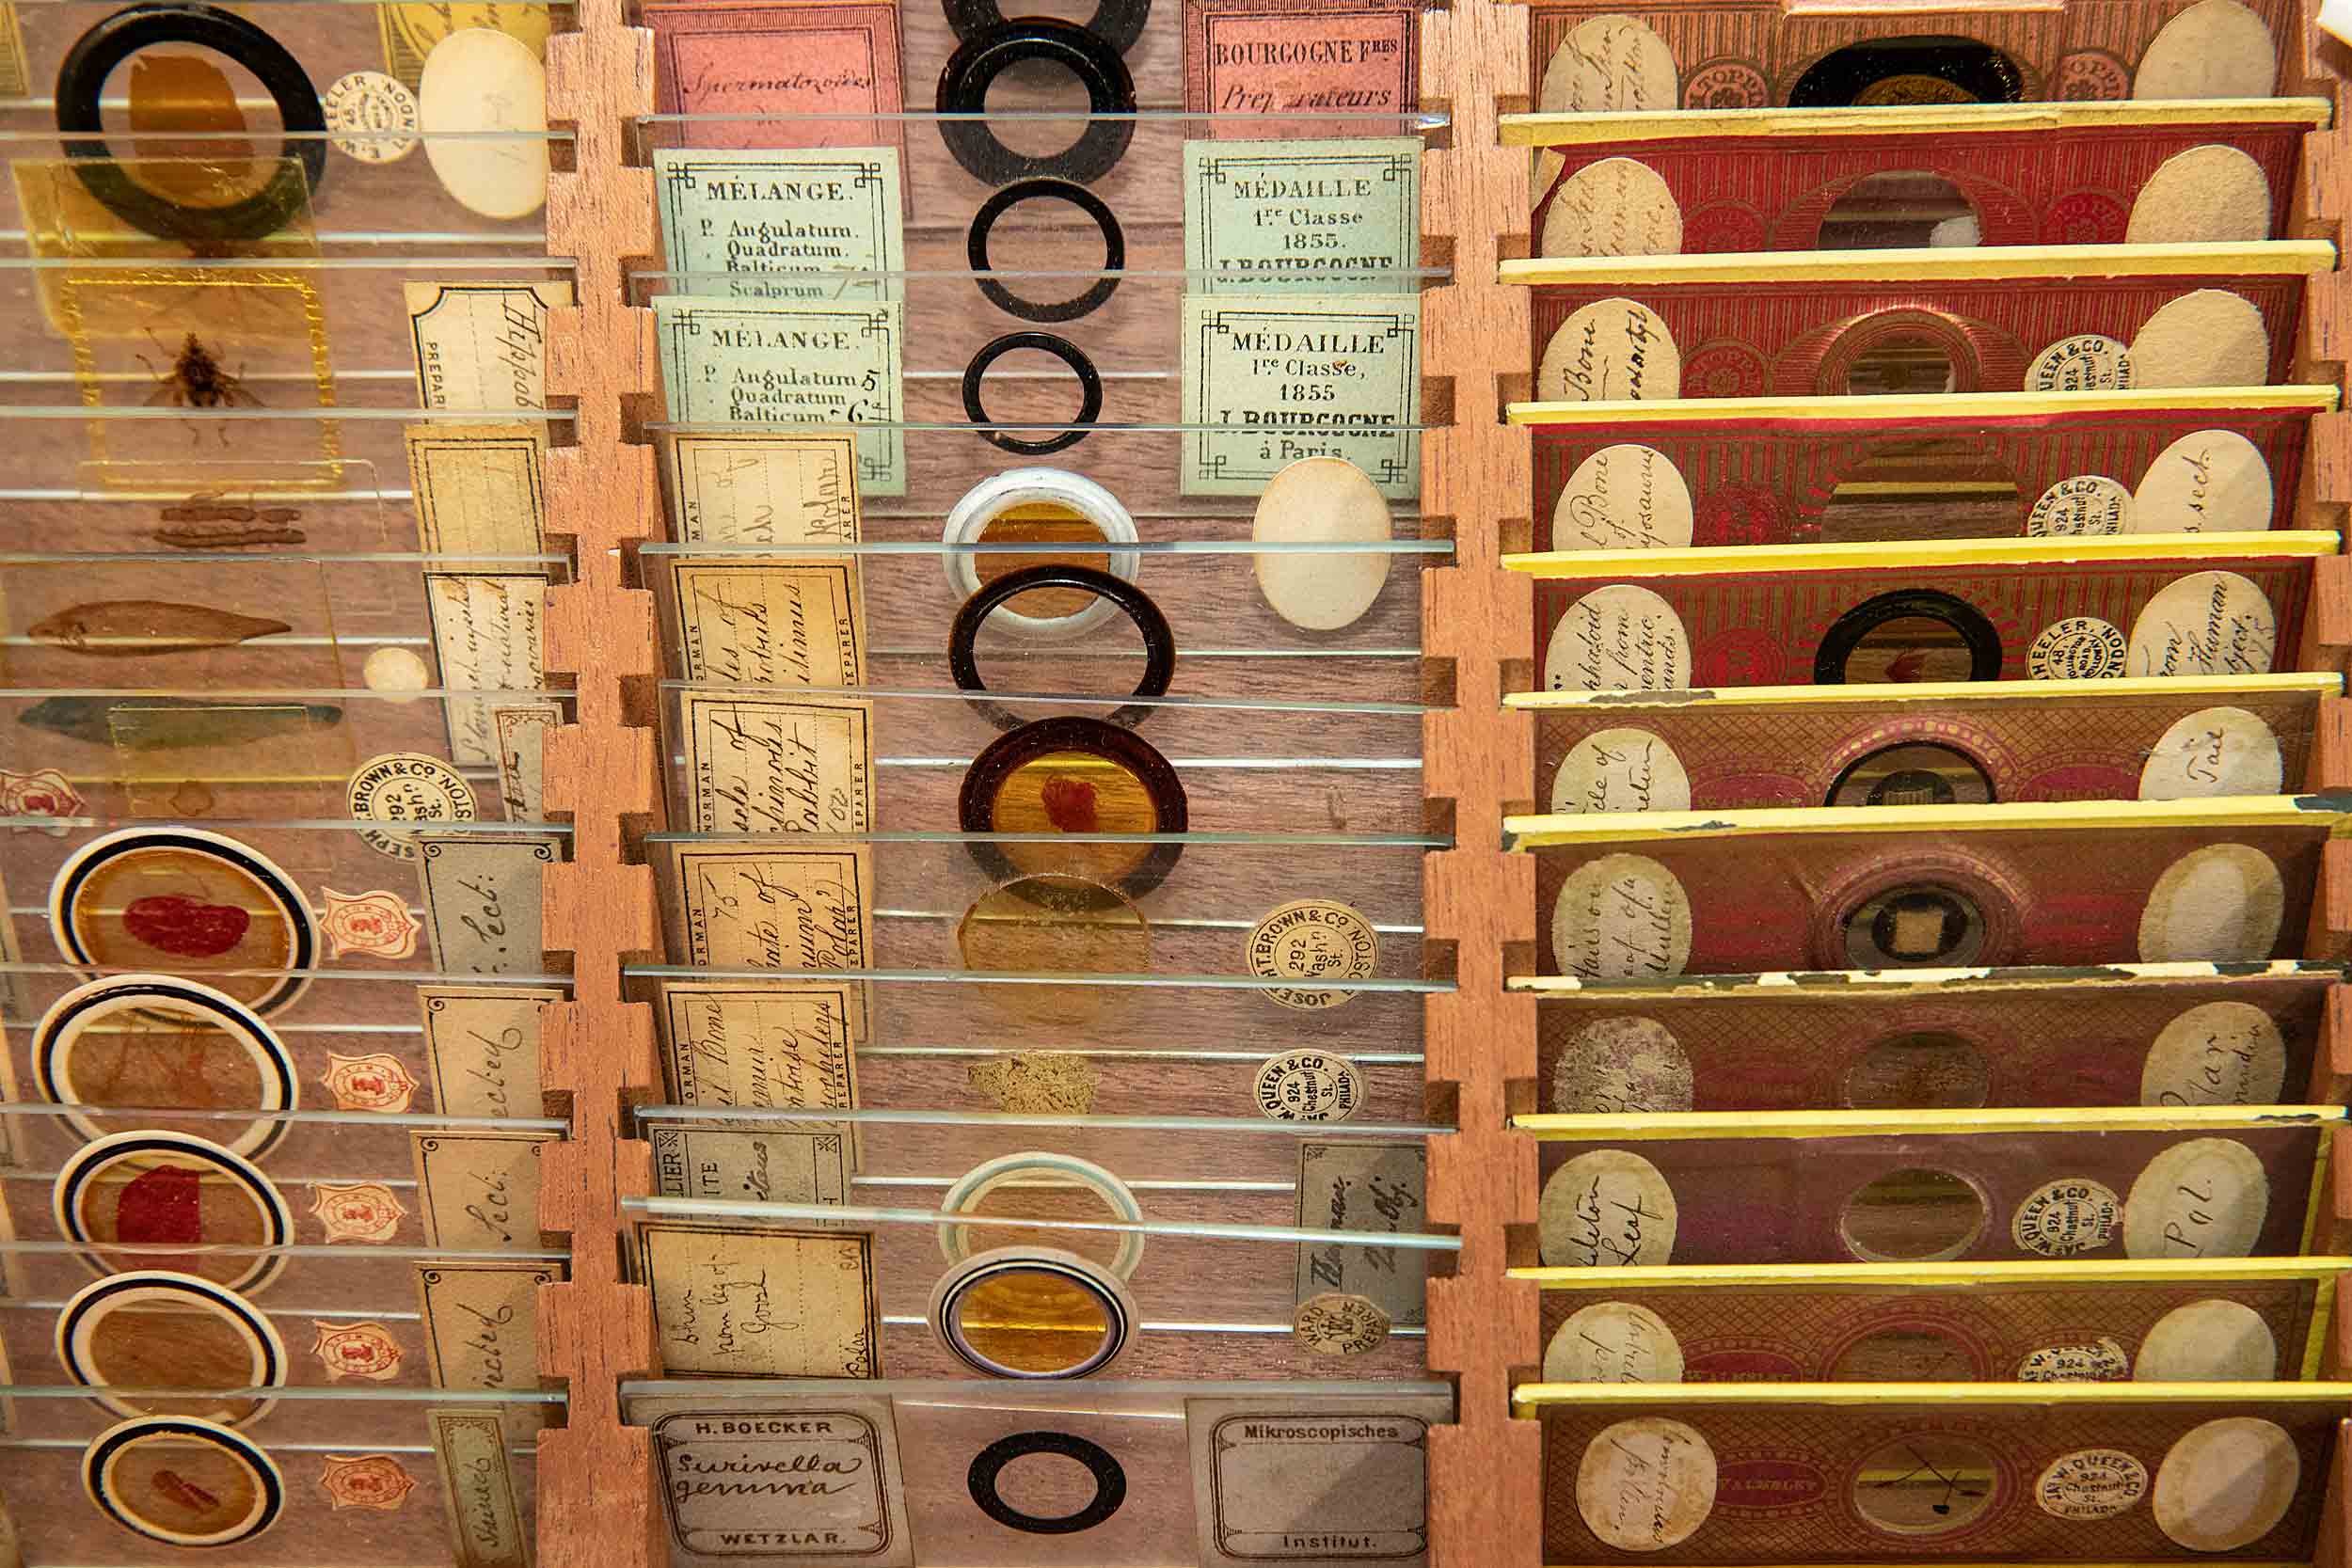 This drawerful of microscope slides contain animal tissue, plants, and insects with a binocular microscope made by H. & W. Crouch, London, 1862-1867.